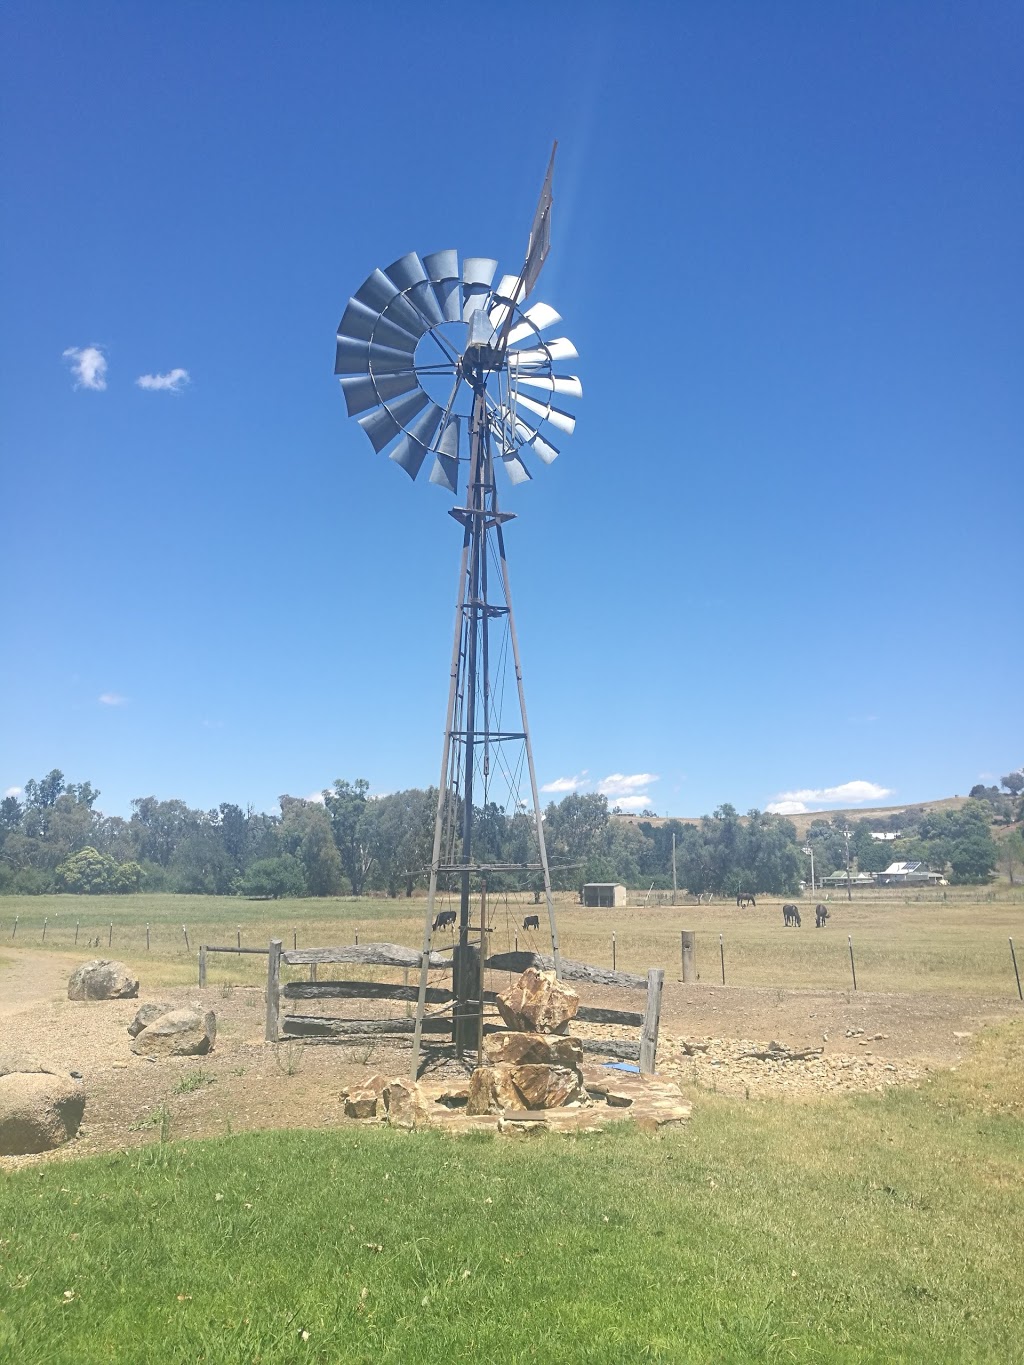 Jugiong Playground and Swimming Pool | gym | 319 Riverside Dr, Jugiong NSW 2726, Australia | 0269454209 OR +61 2 6945 4209